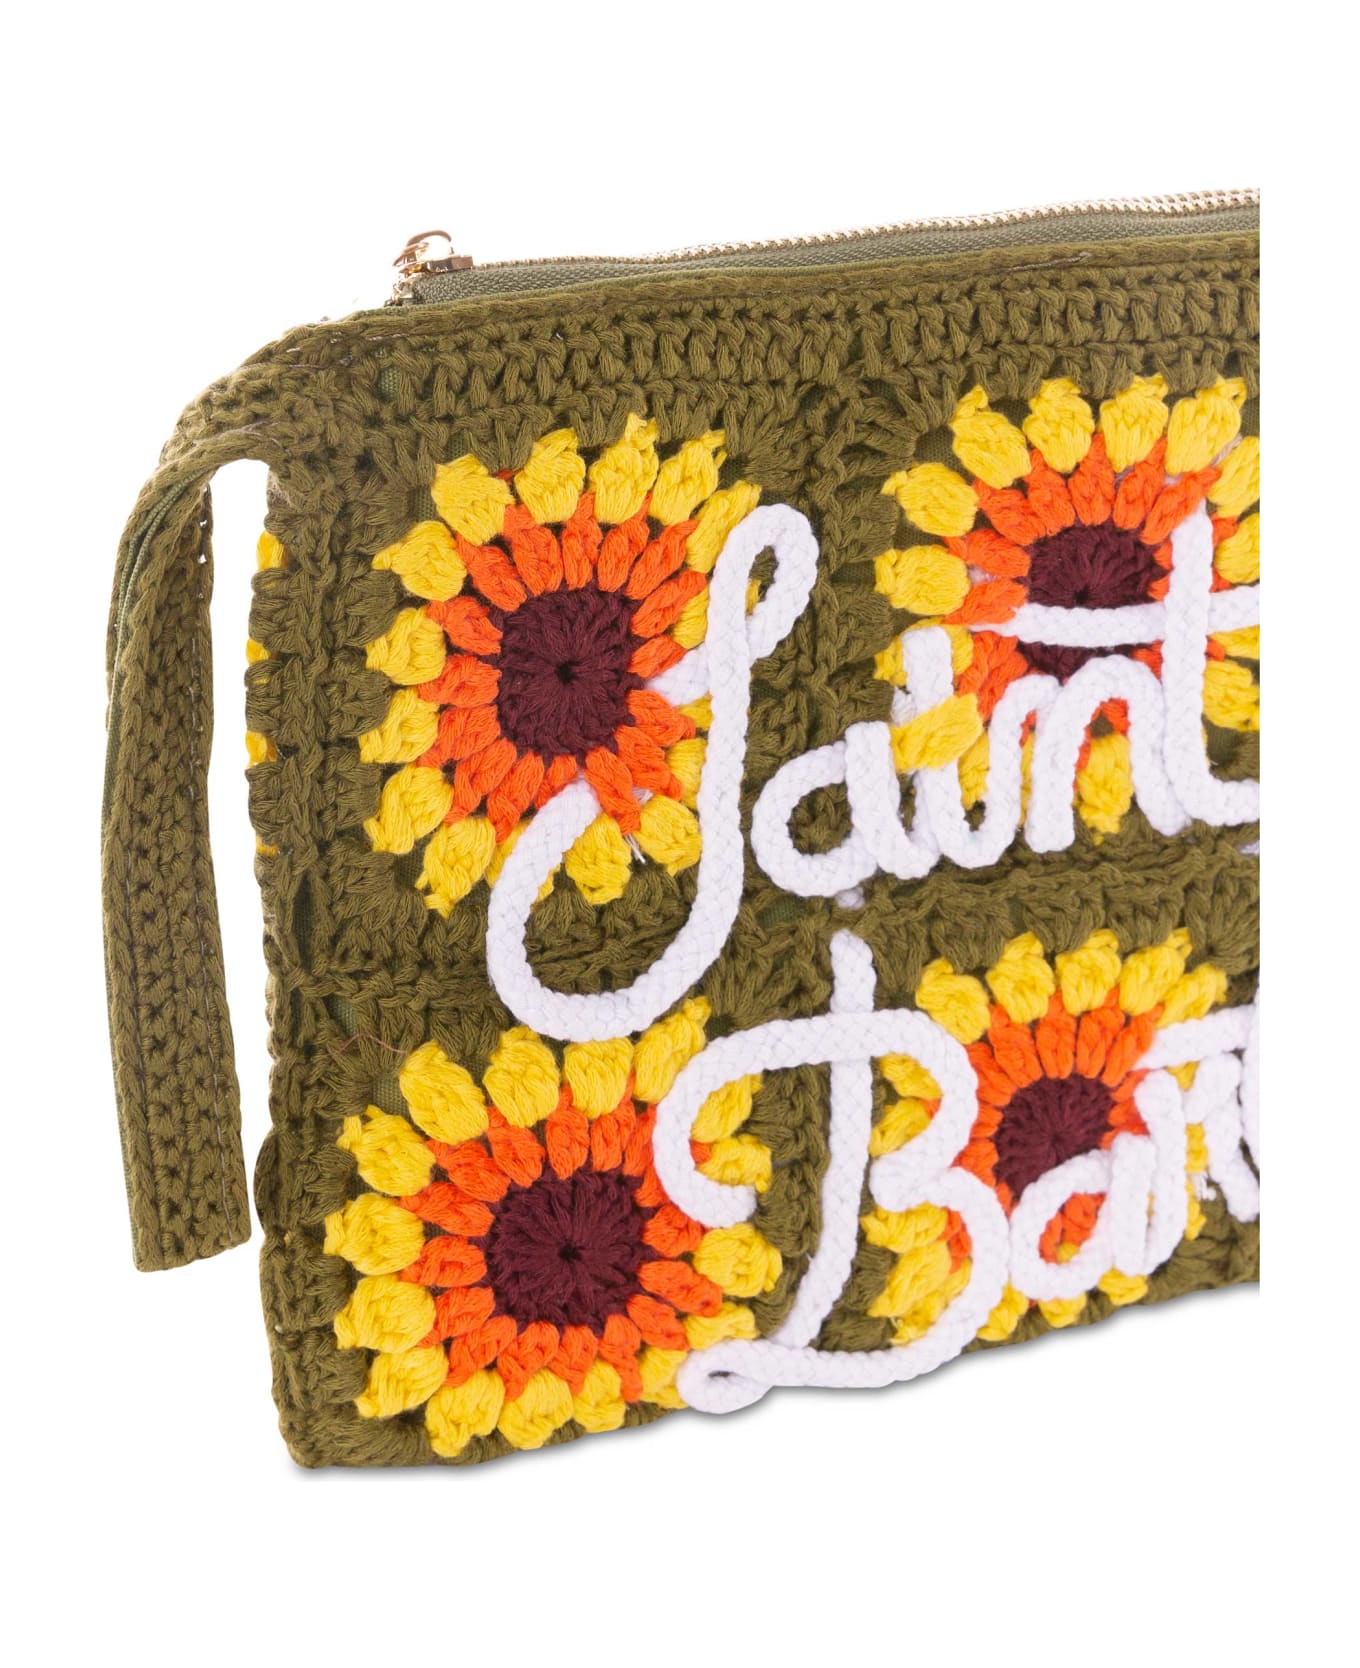 MC2 Saint Barth Parisienne Crochet Pouch Bag With Sunflower Embroidery - GREEN